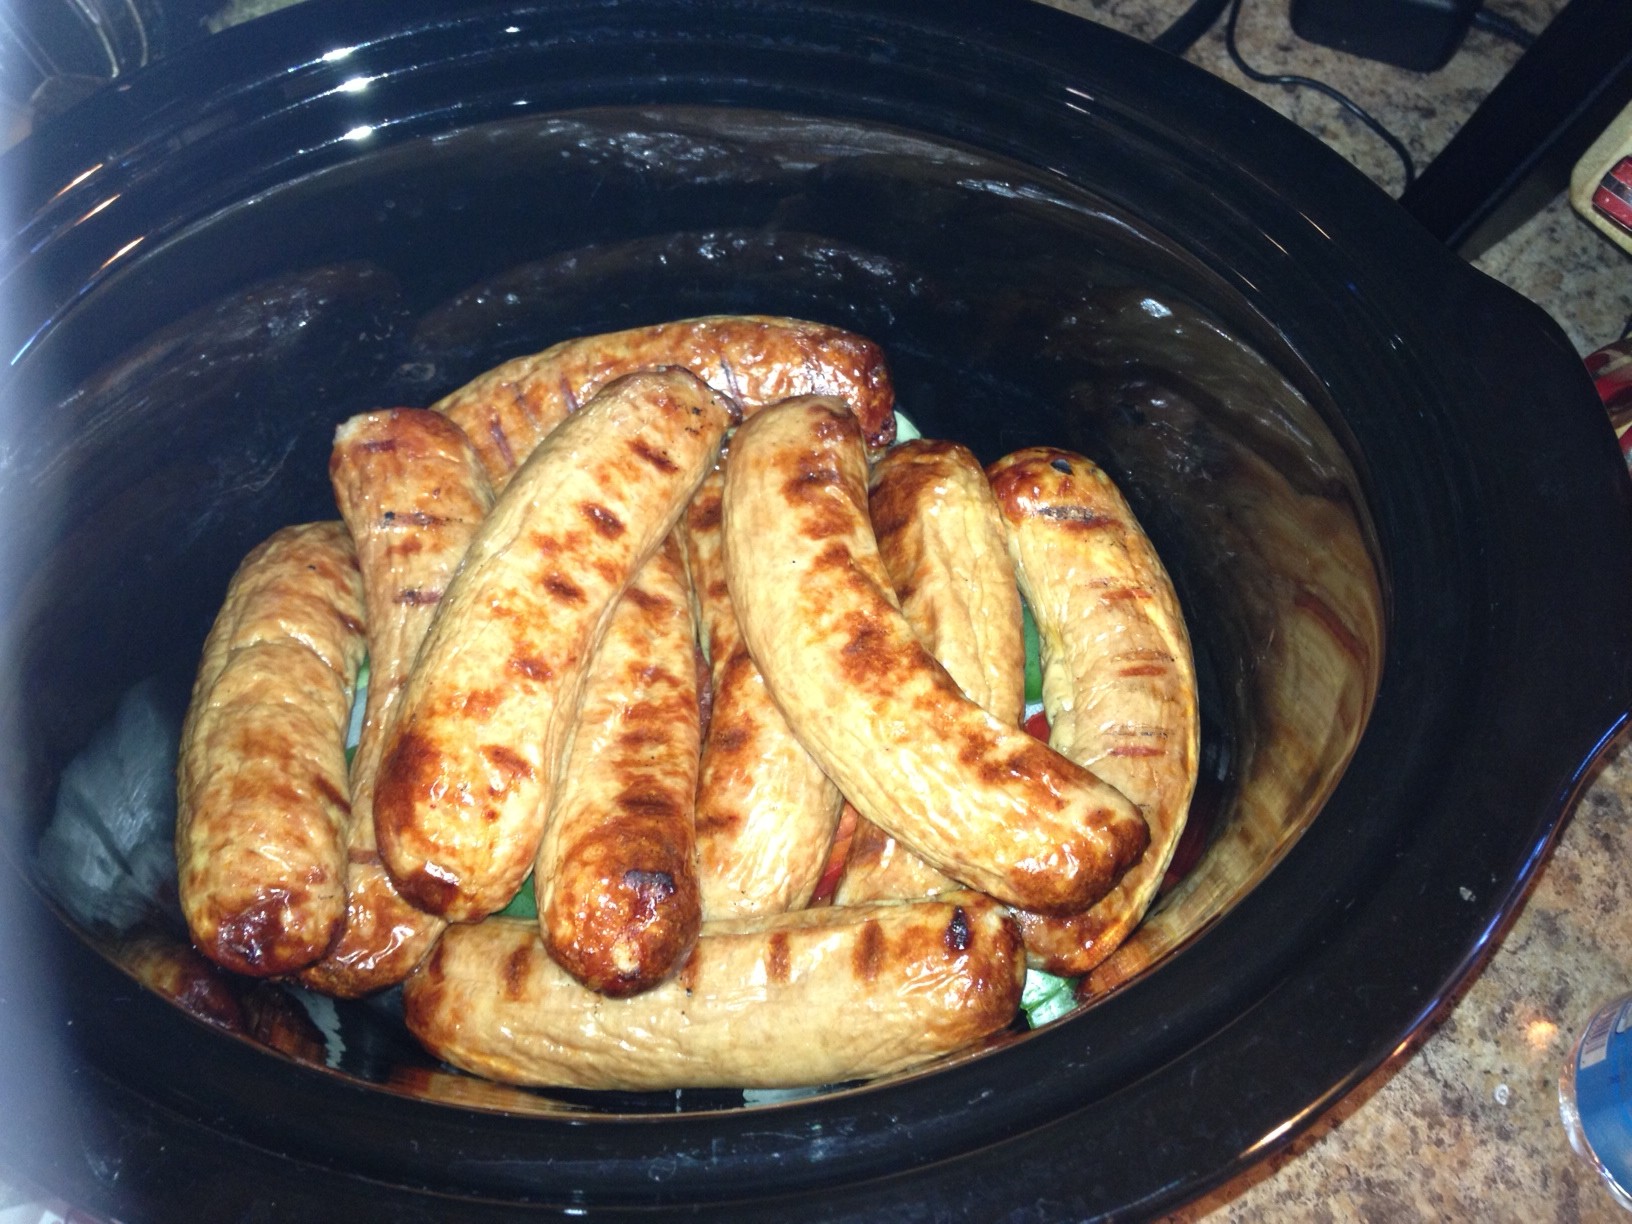 Crock Pot Barbecued Beer Brats with Onions and Peppers.